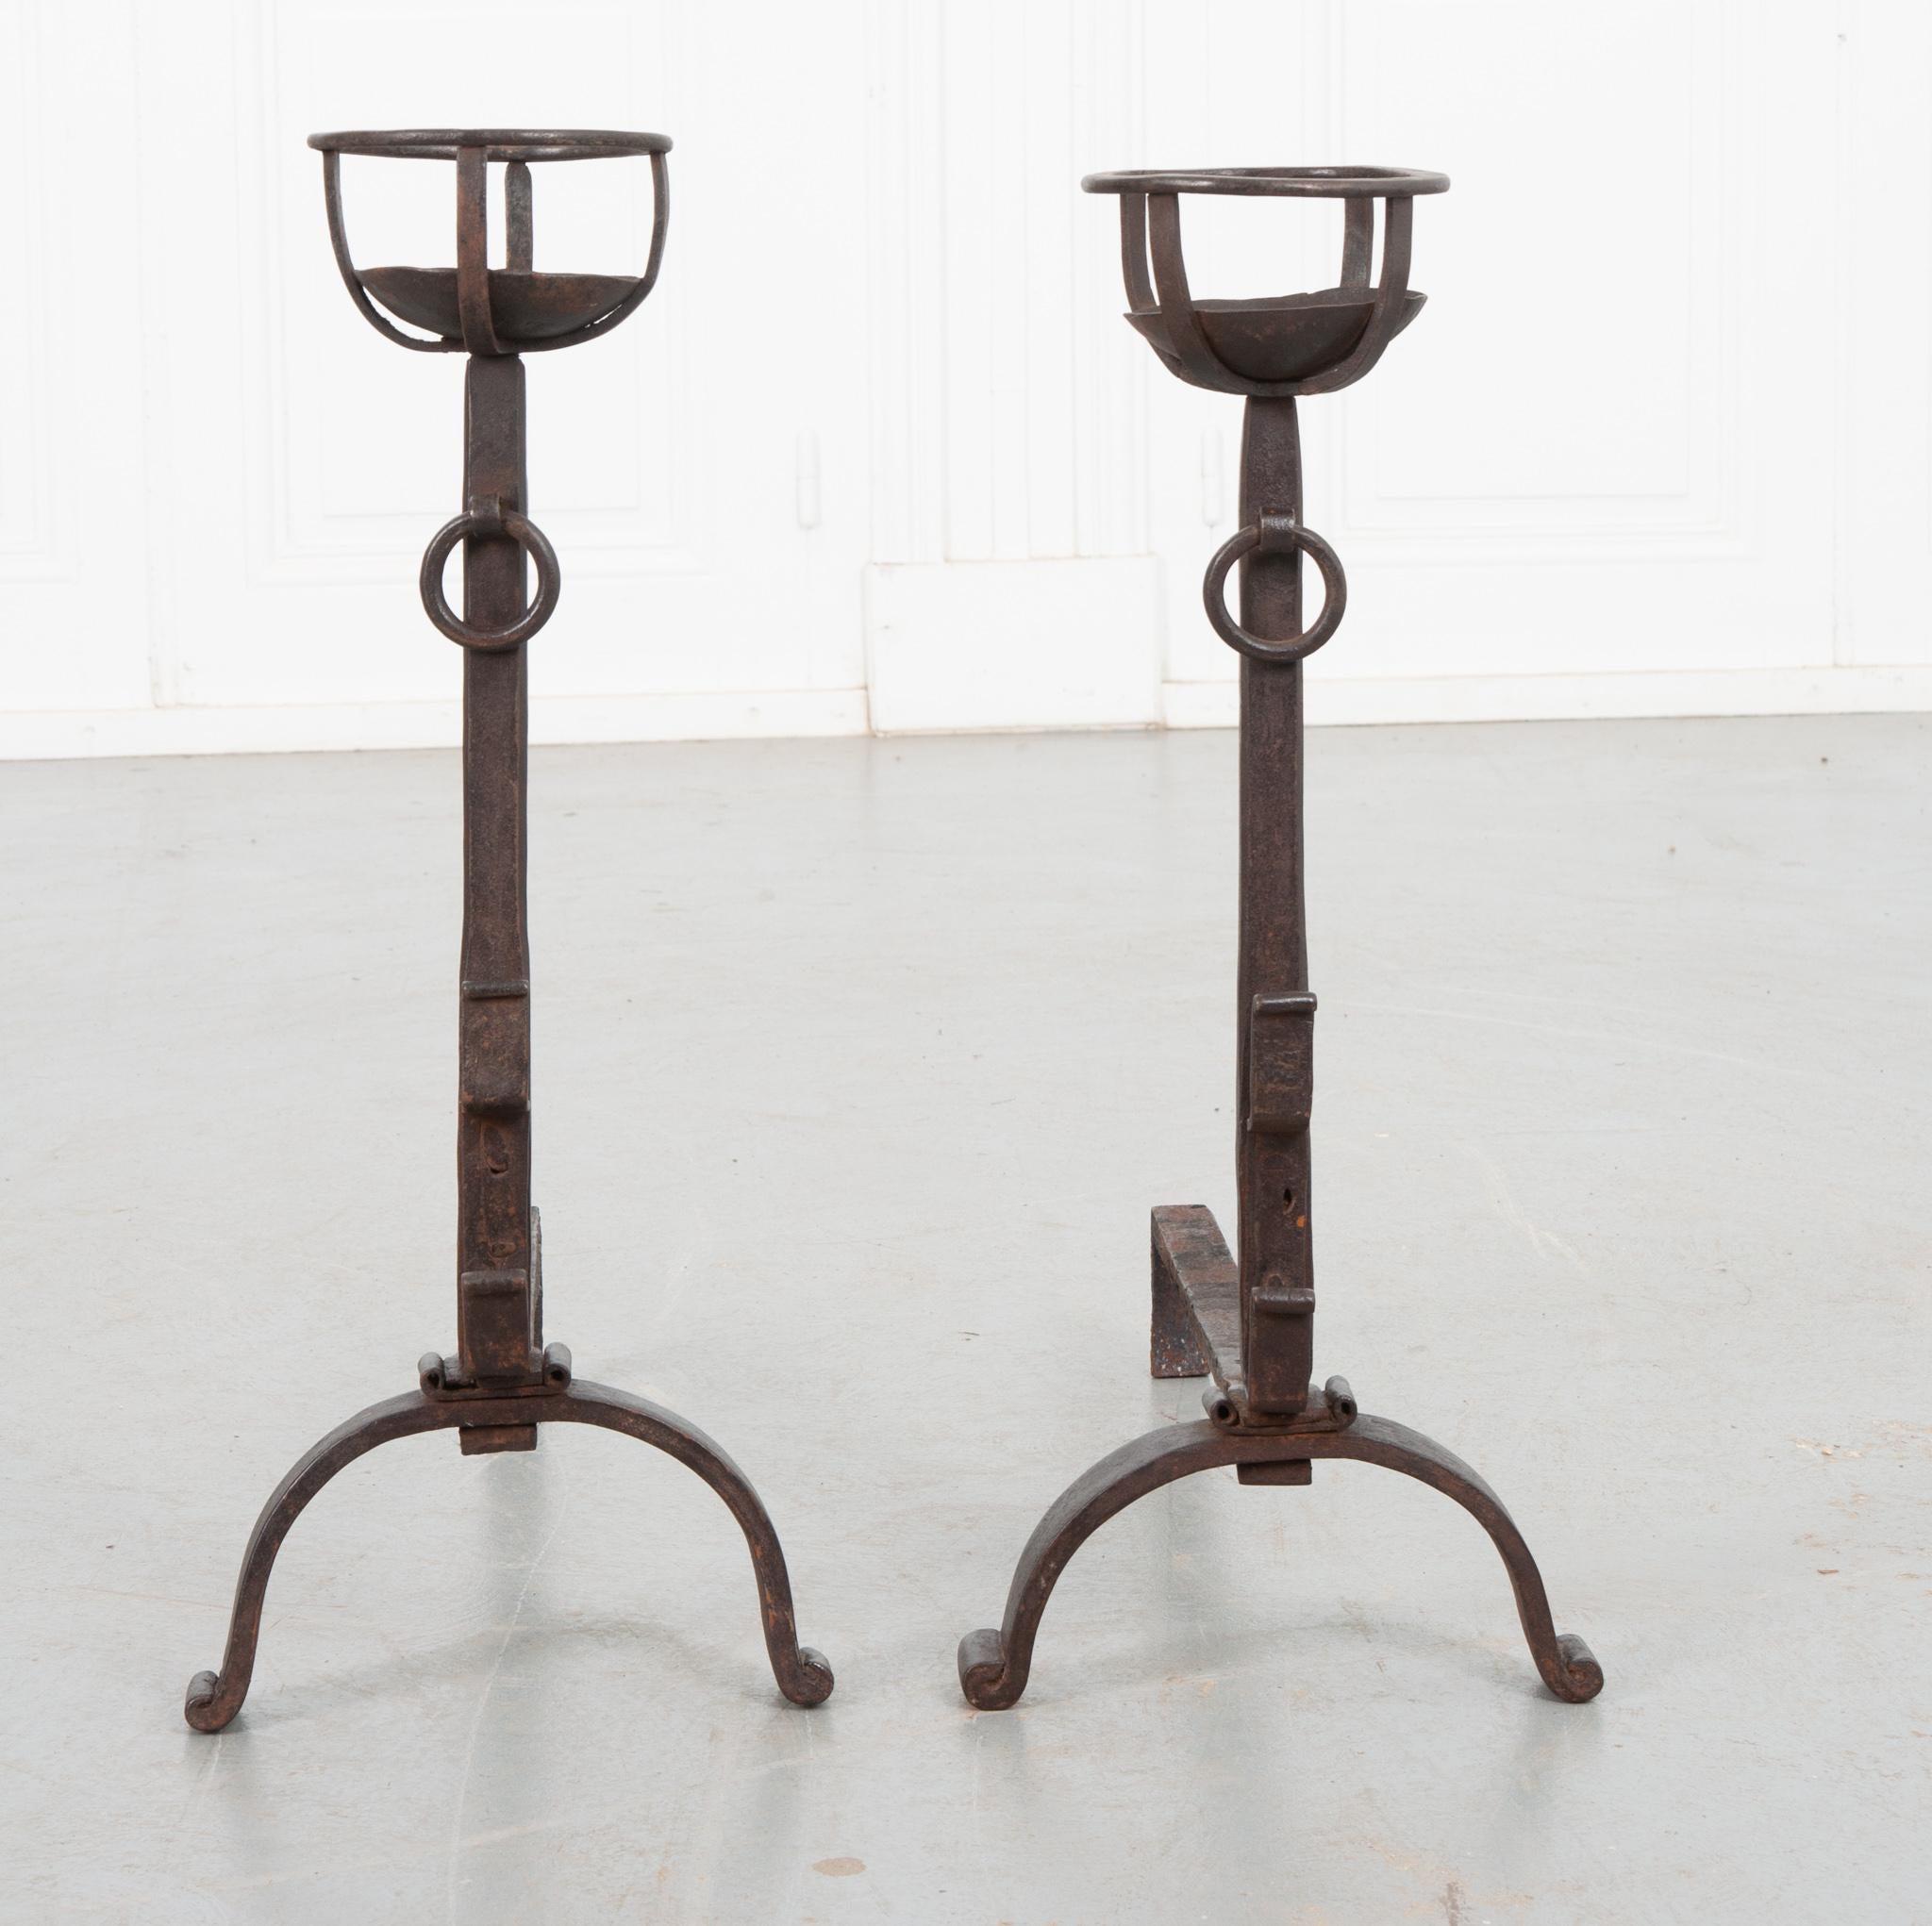 Rustic French 19th Century Forged Iron Andirons